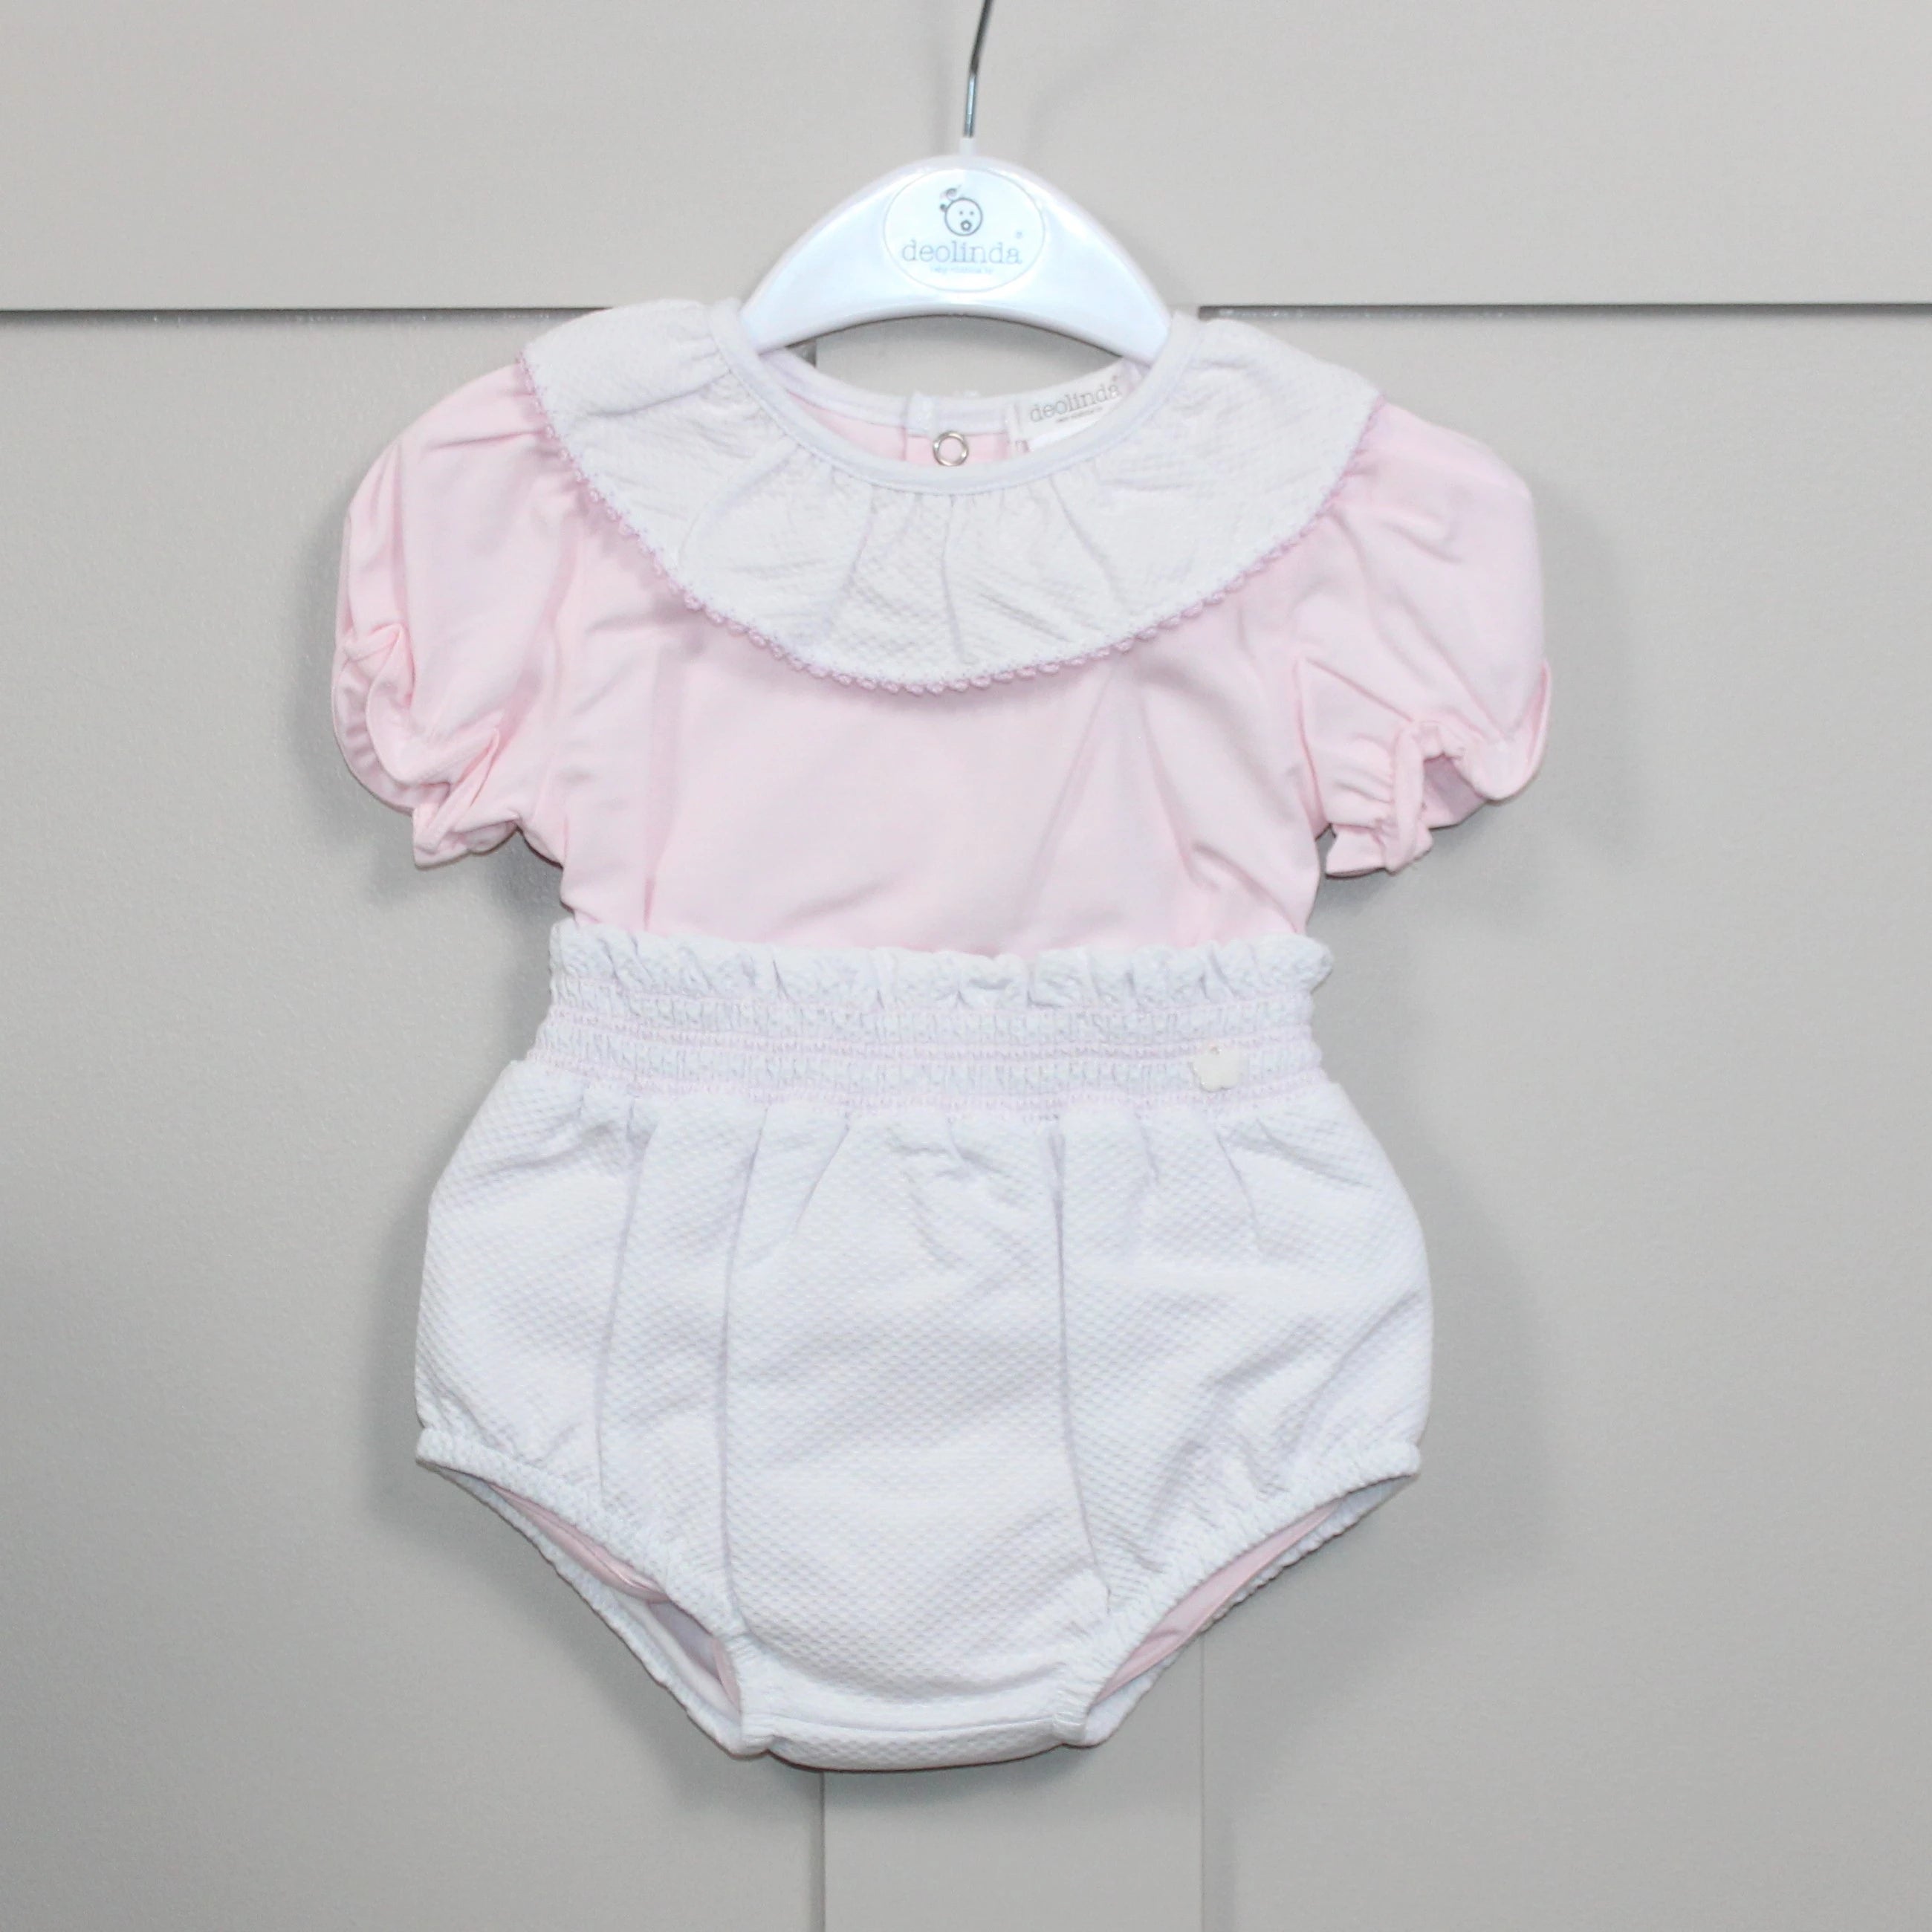 deolinda Pink blouse and bloomers ser 